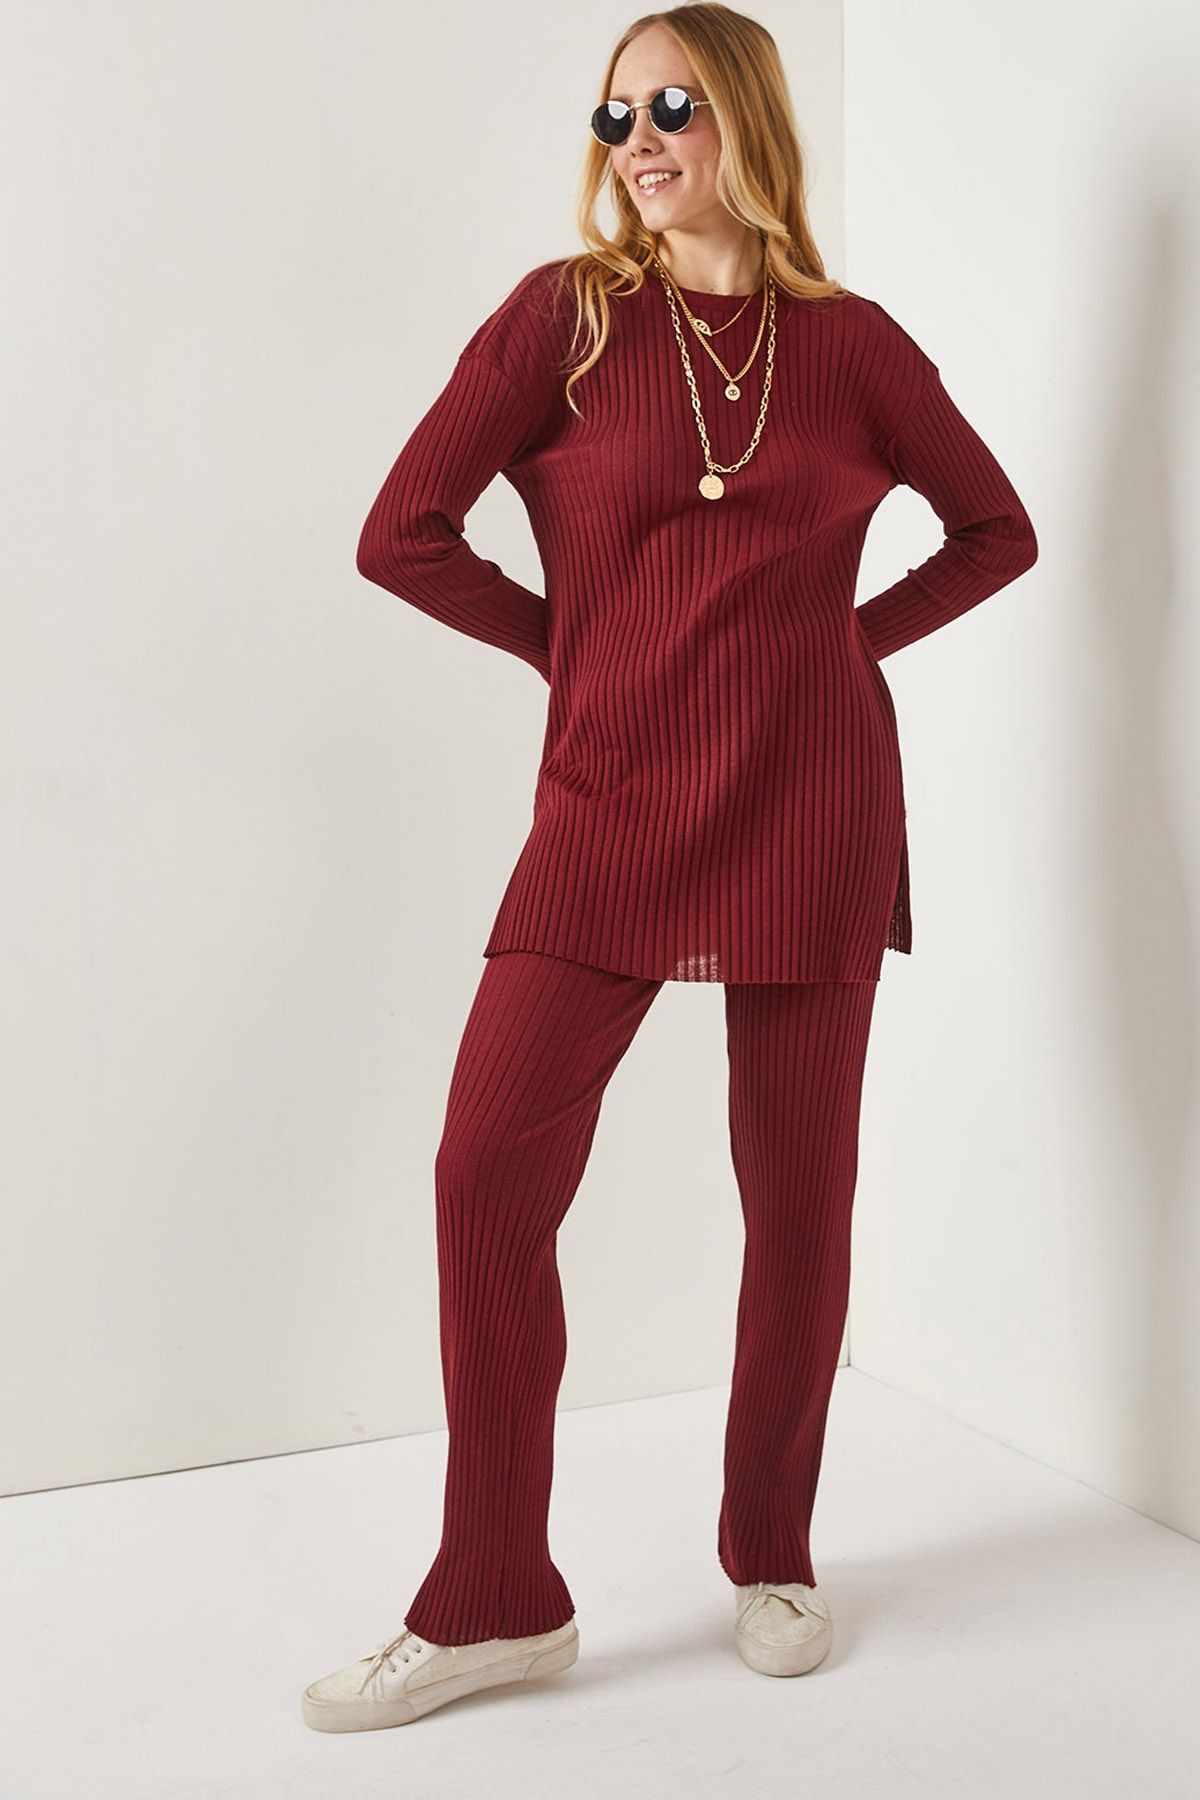 Olalook Two-Piece Set - Burgundy - Relaxed fit - Trendyol